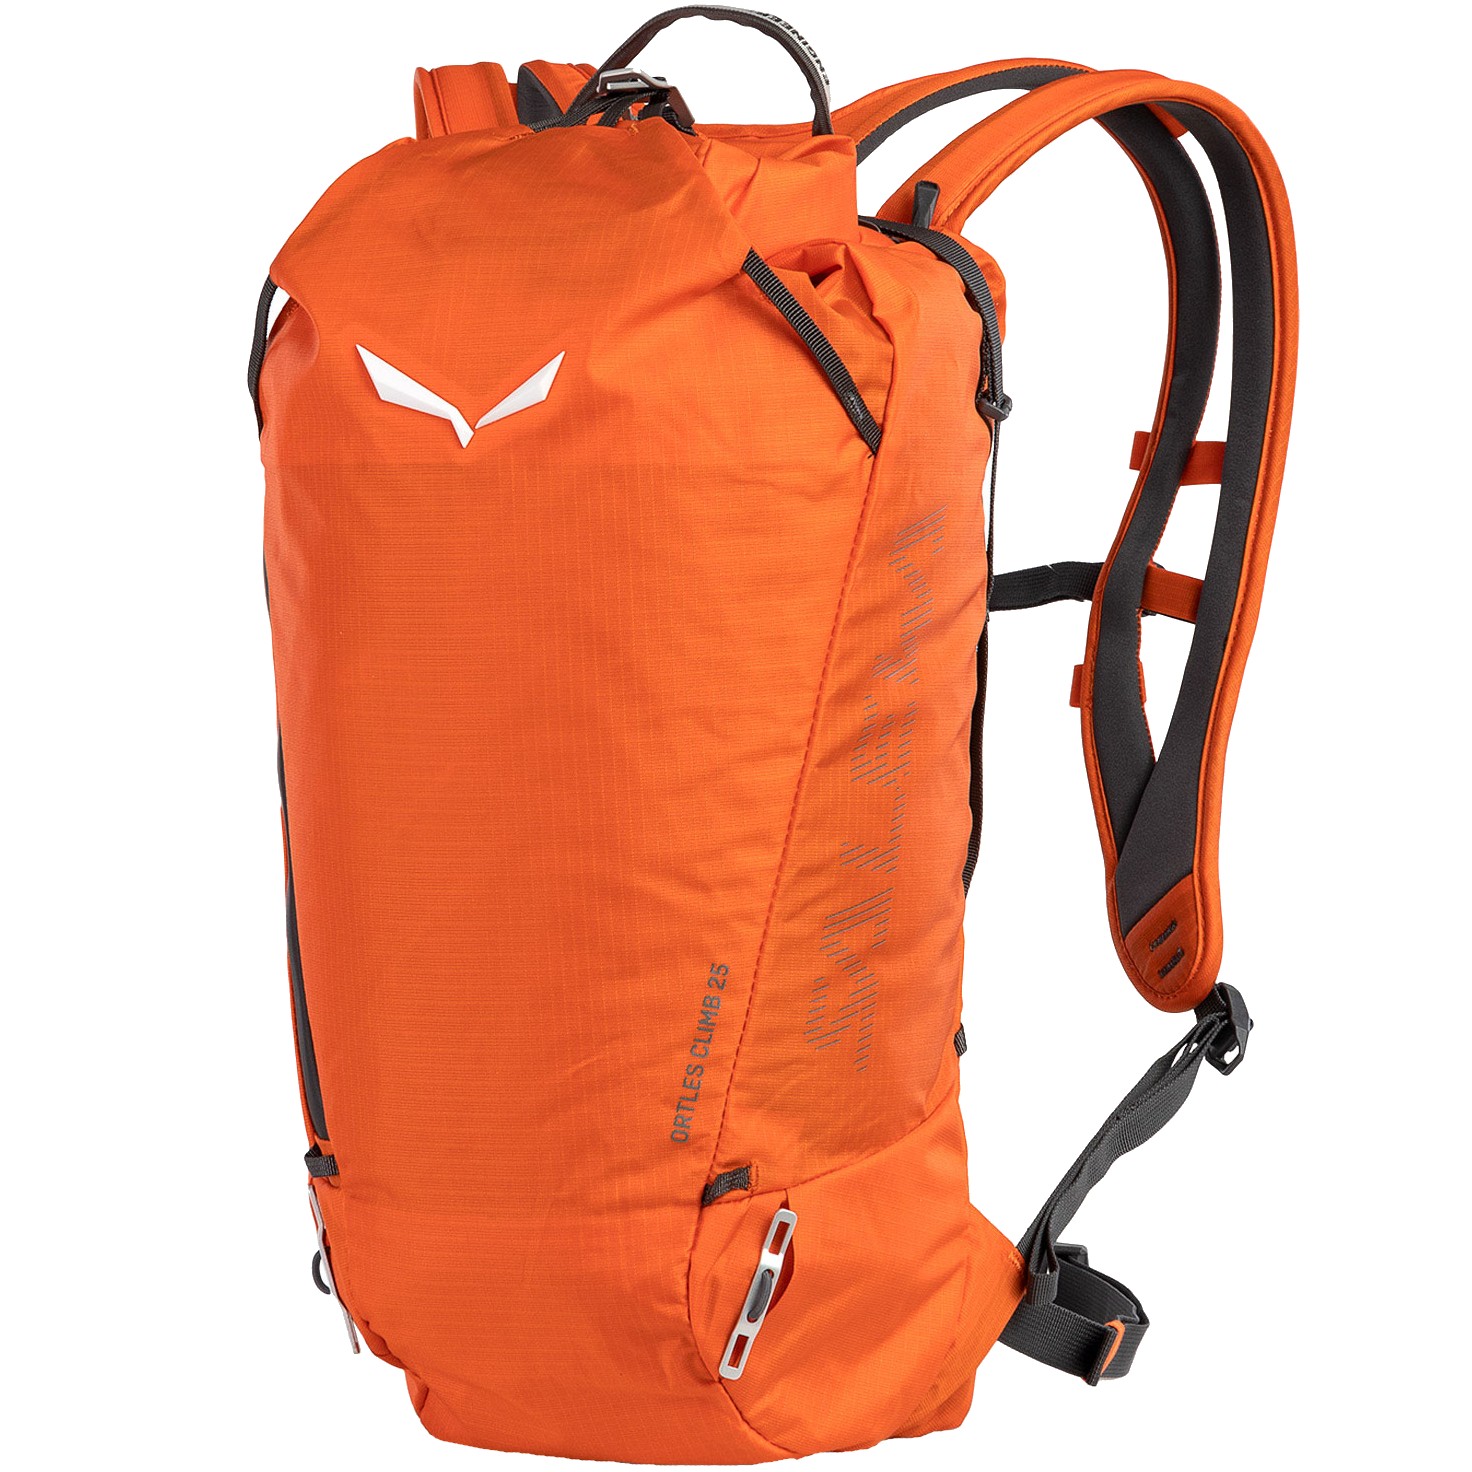 Photos - Backpack Salewa Ortles Climb 25 Mountaineering  25L Red Orange 001283 